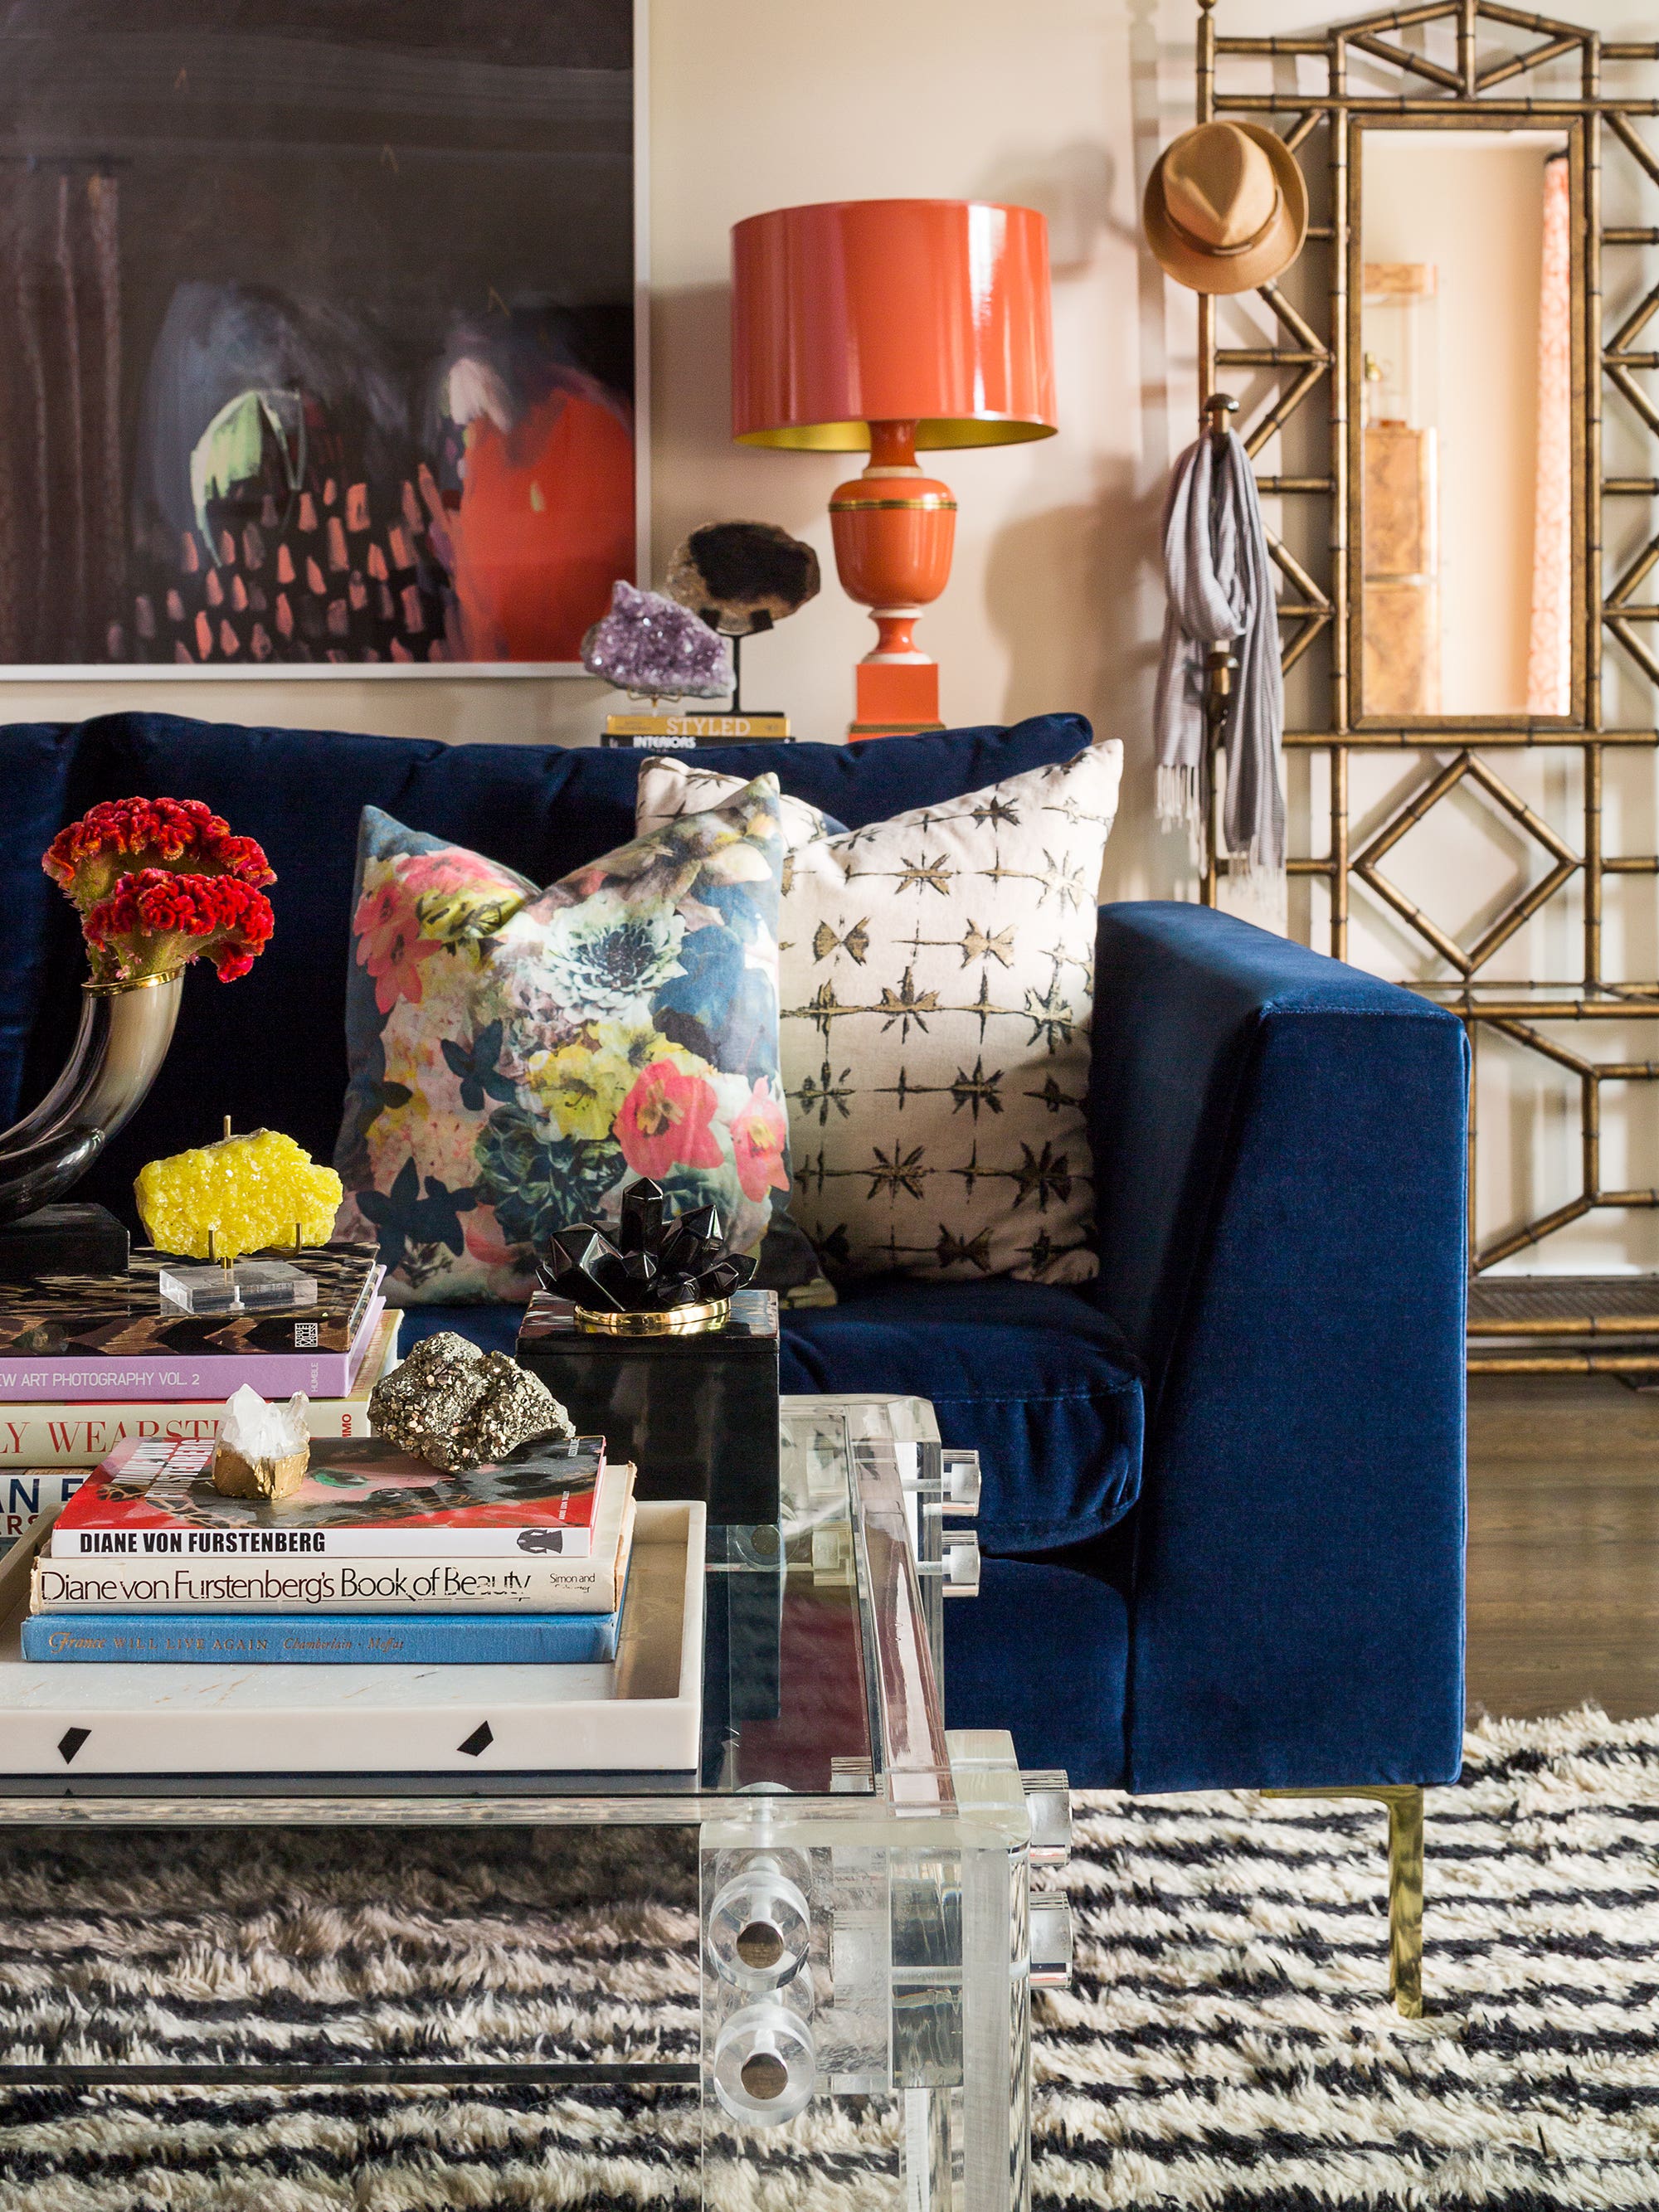 Unexpected Pops of Color and Vintage Treasures Complete This Chicago Home